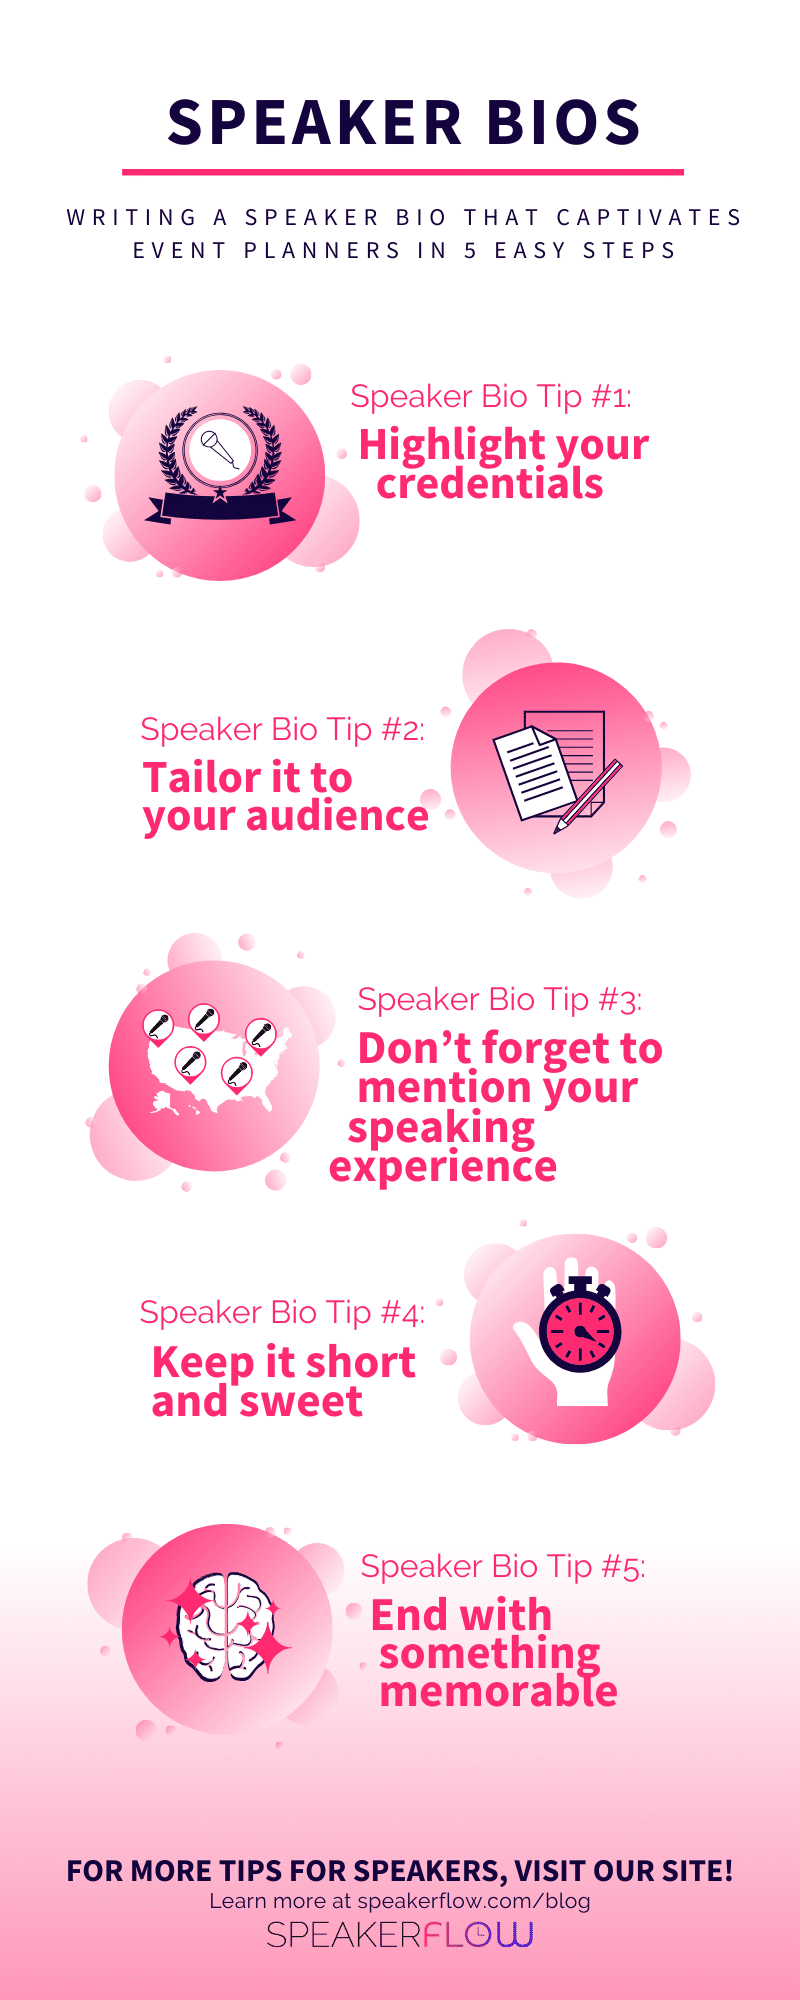 Infographic for Speaker Bios Writing A Speaker Bio That Captivates Event Planners In 5 Easy Steps - SpeakerFlow